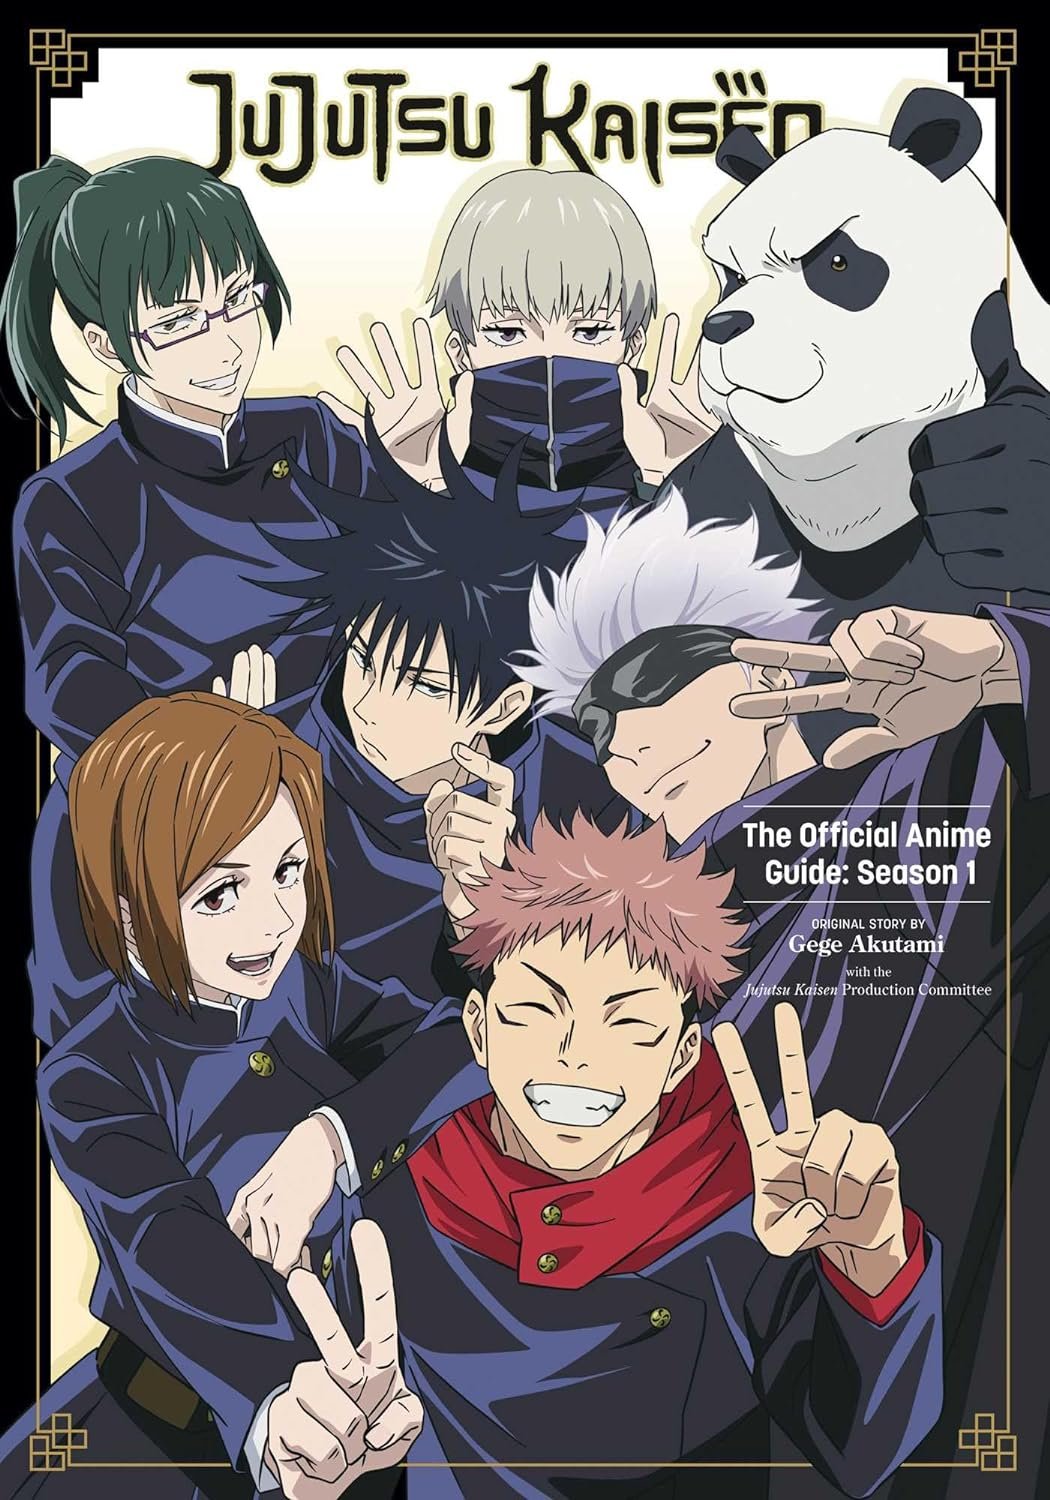 Demon Slayer Official TV Anime Characters Book Vol.2 Japanese version